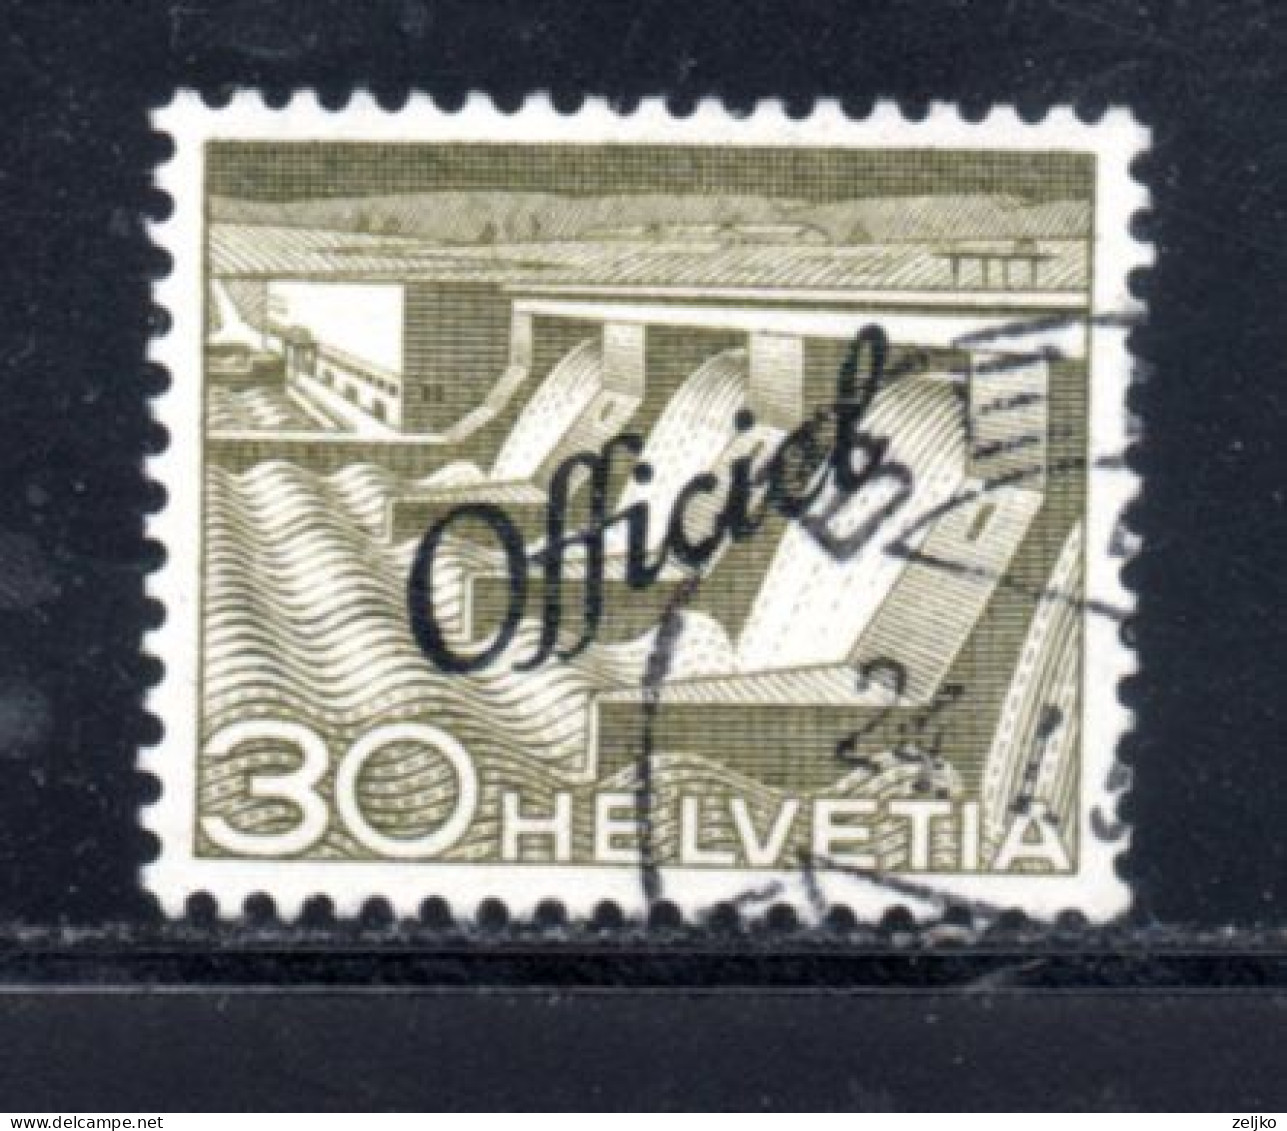 Switzerland, Used, Official, 1950, Michel 69 - Officials